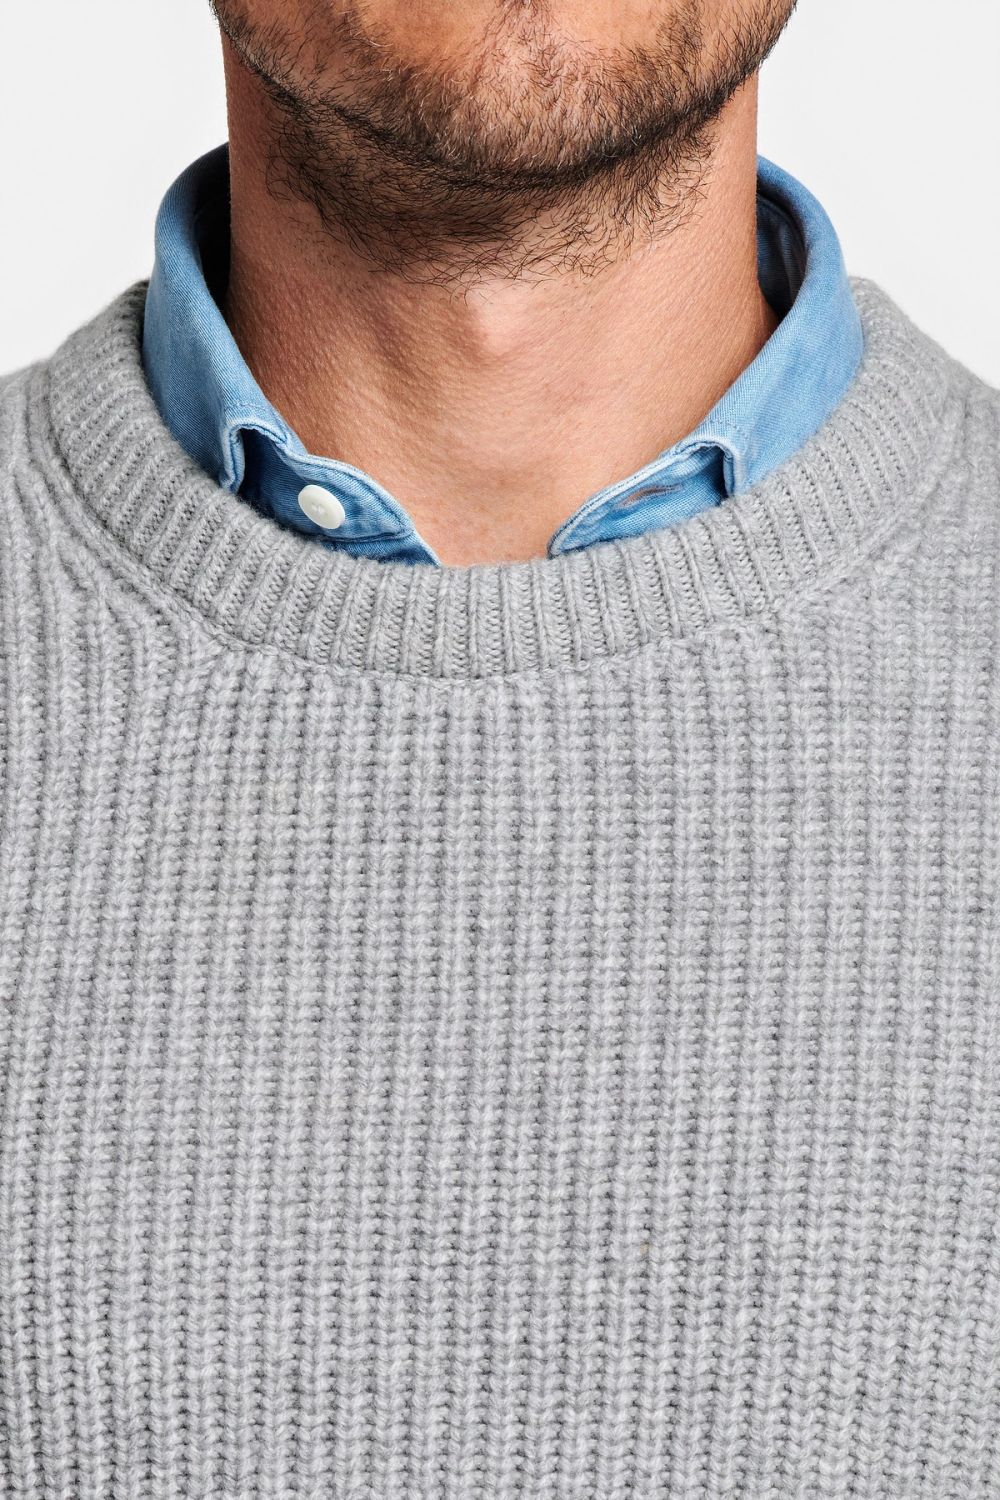 Oysters * The Knit Pullover